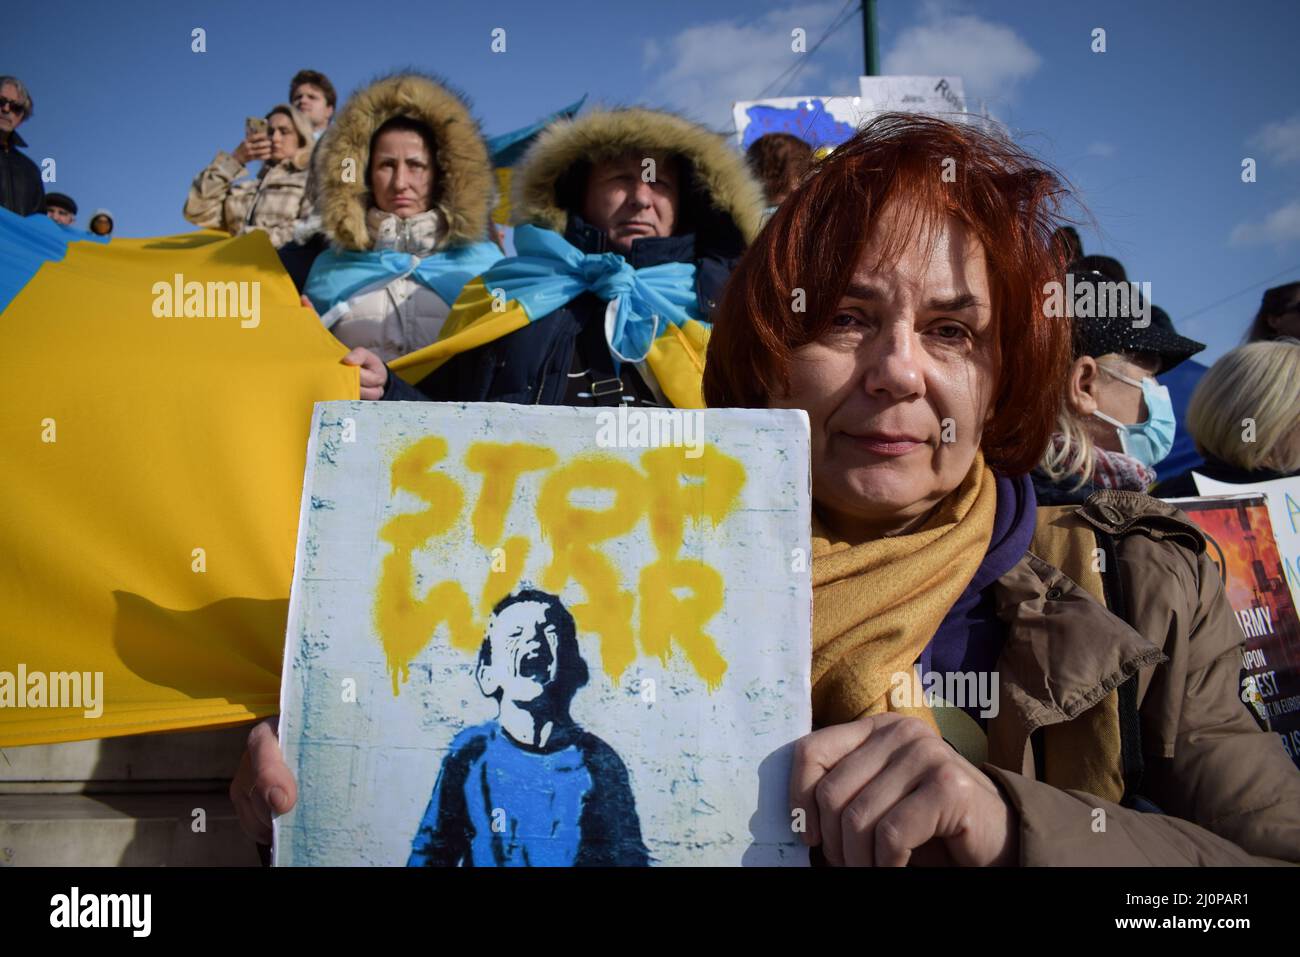 Ukrainian refugees protest against the Russian invasion of Ukraine, holding placards and Ukrainian flags, at central Syntagma square ahead of the Greek Parliament in Athens, Greece on March 19, 2022.  (Photo by Dimitris Aspiotis/Pacific Press/Sipa USA) Stock Photo